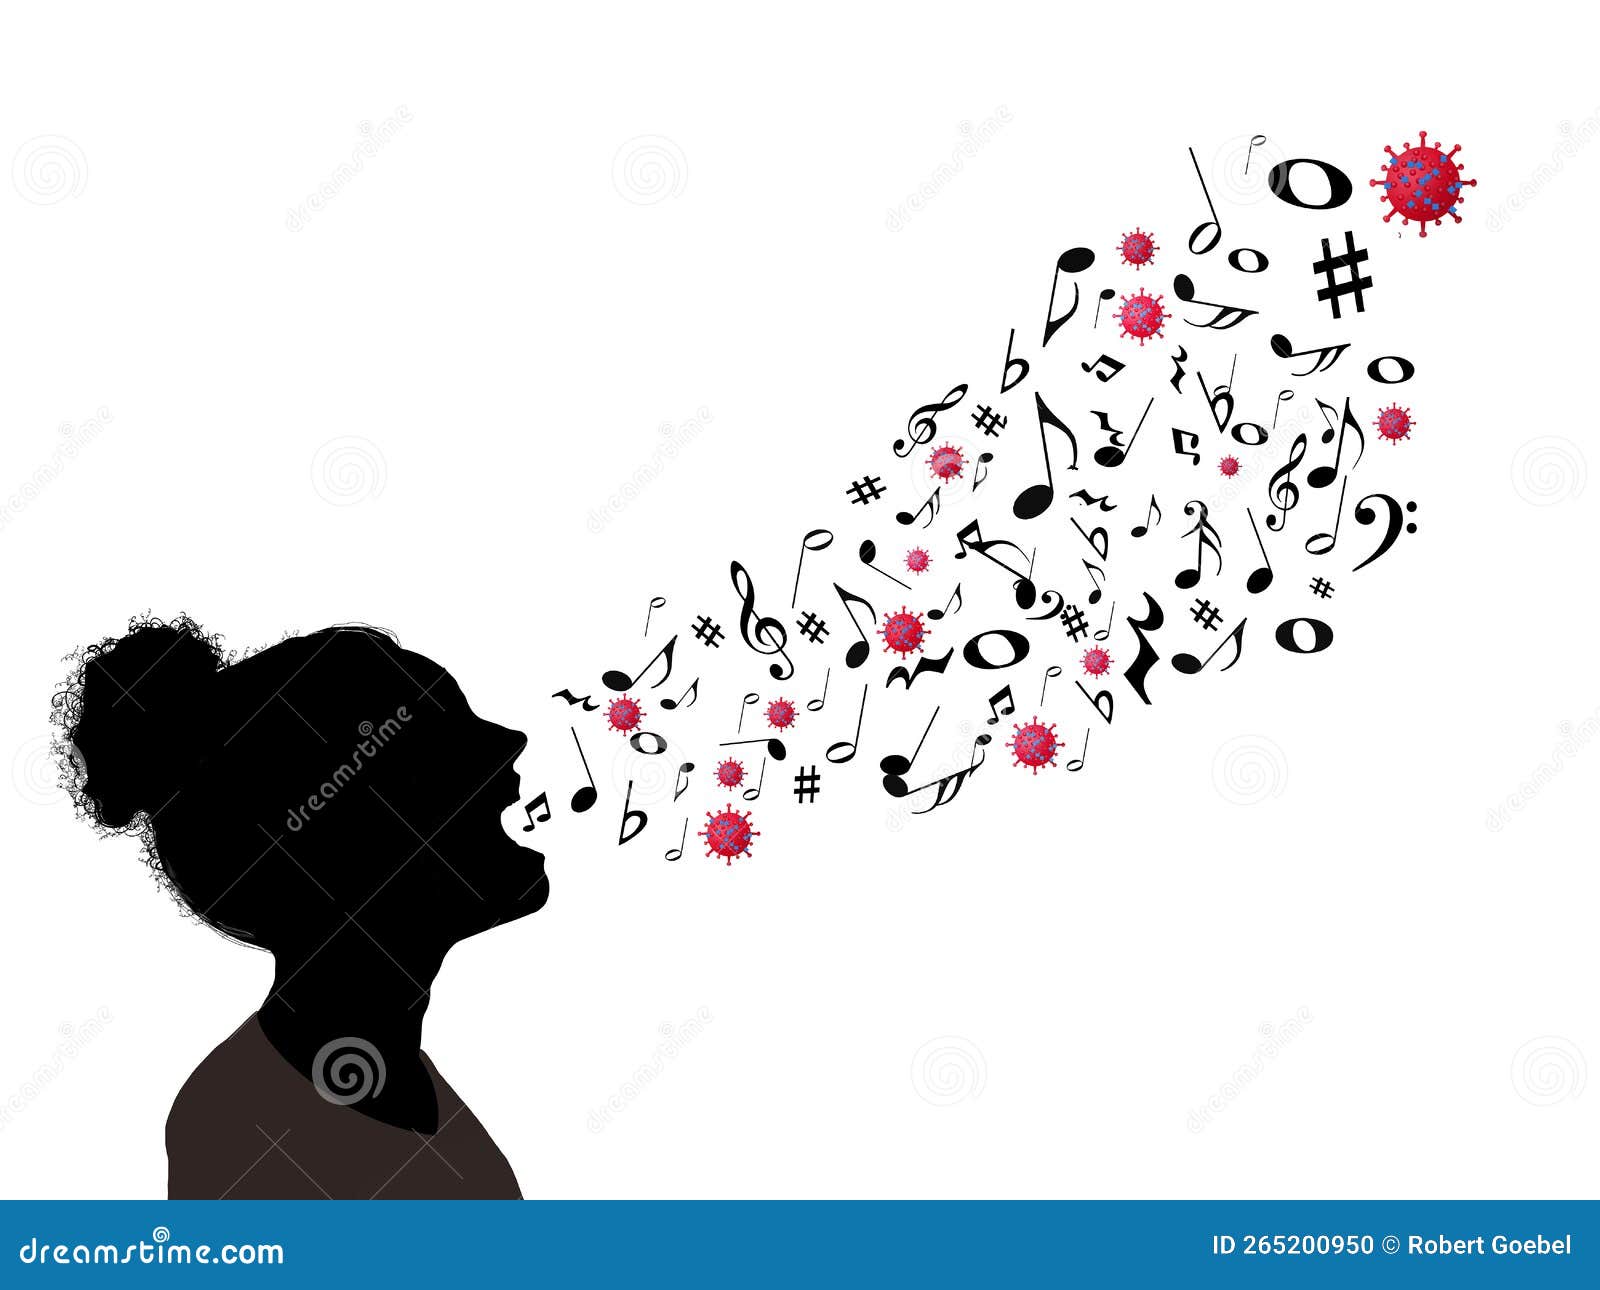 a young woman sings and spews music and influenza particles out of her mouth